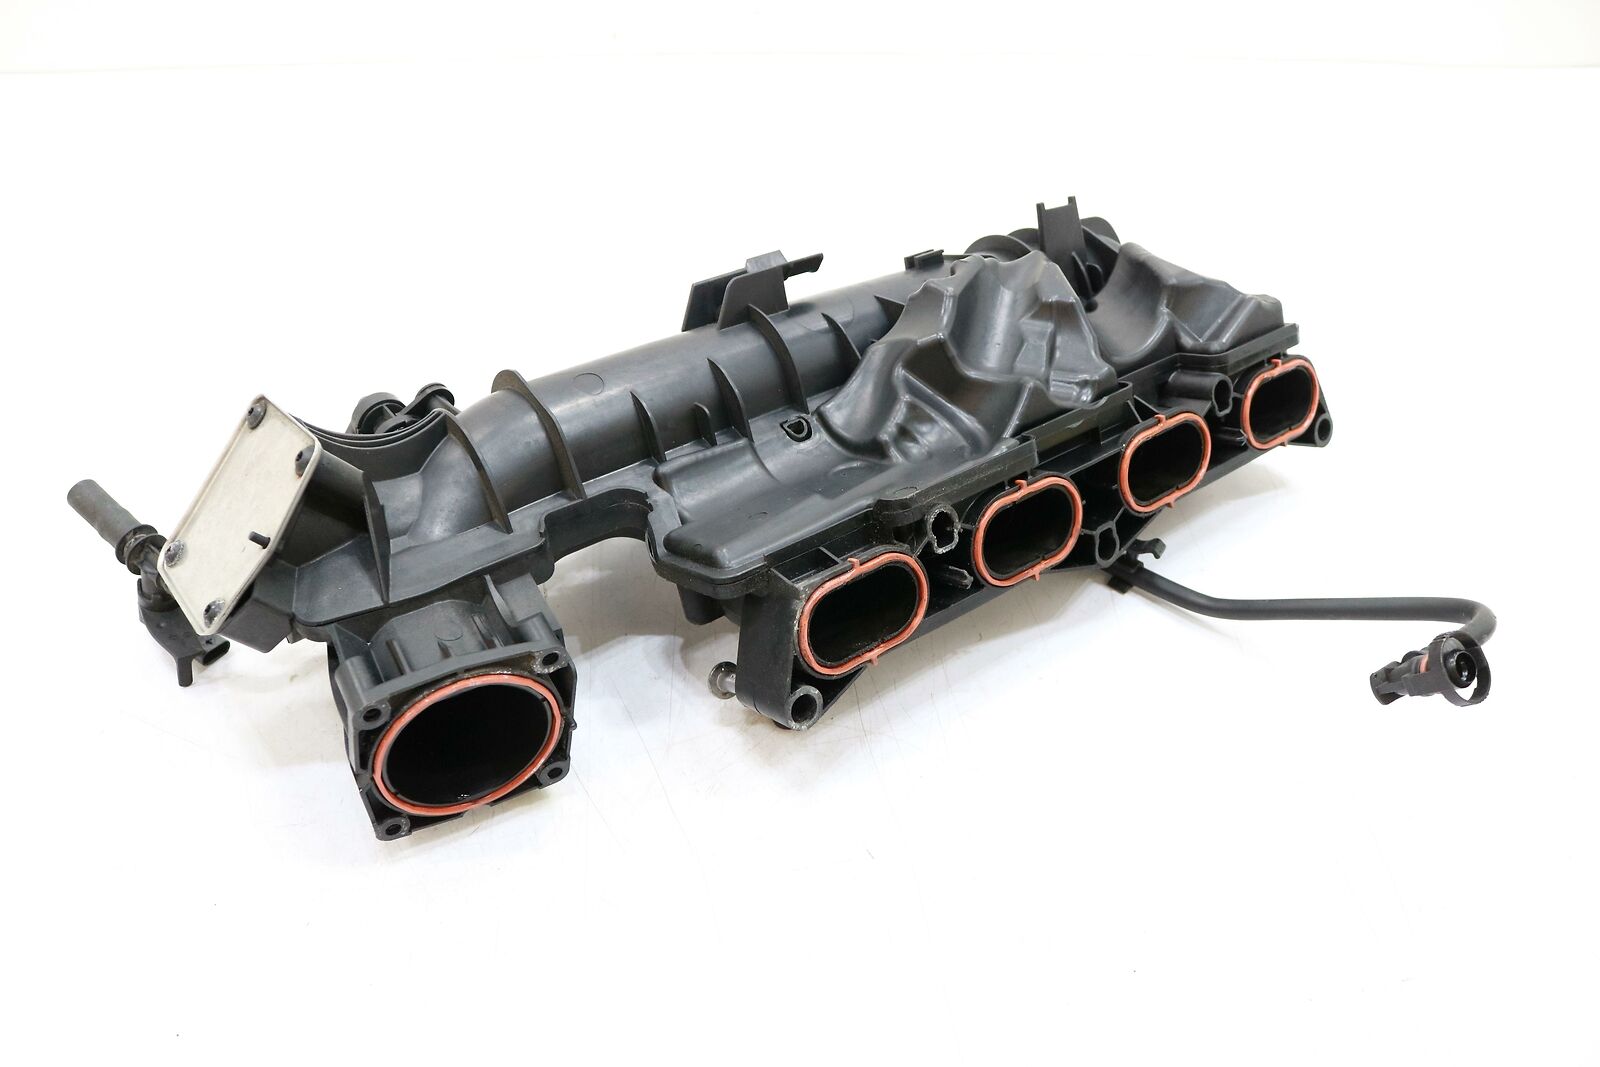 2014 - 2019 MERCEDES CLA250 W117 AIR MANIFOLD ENGINE Low price 2.0L New Shipping Free INTAKE